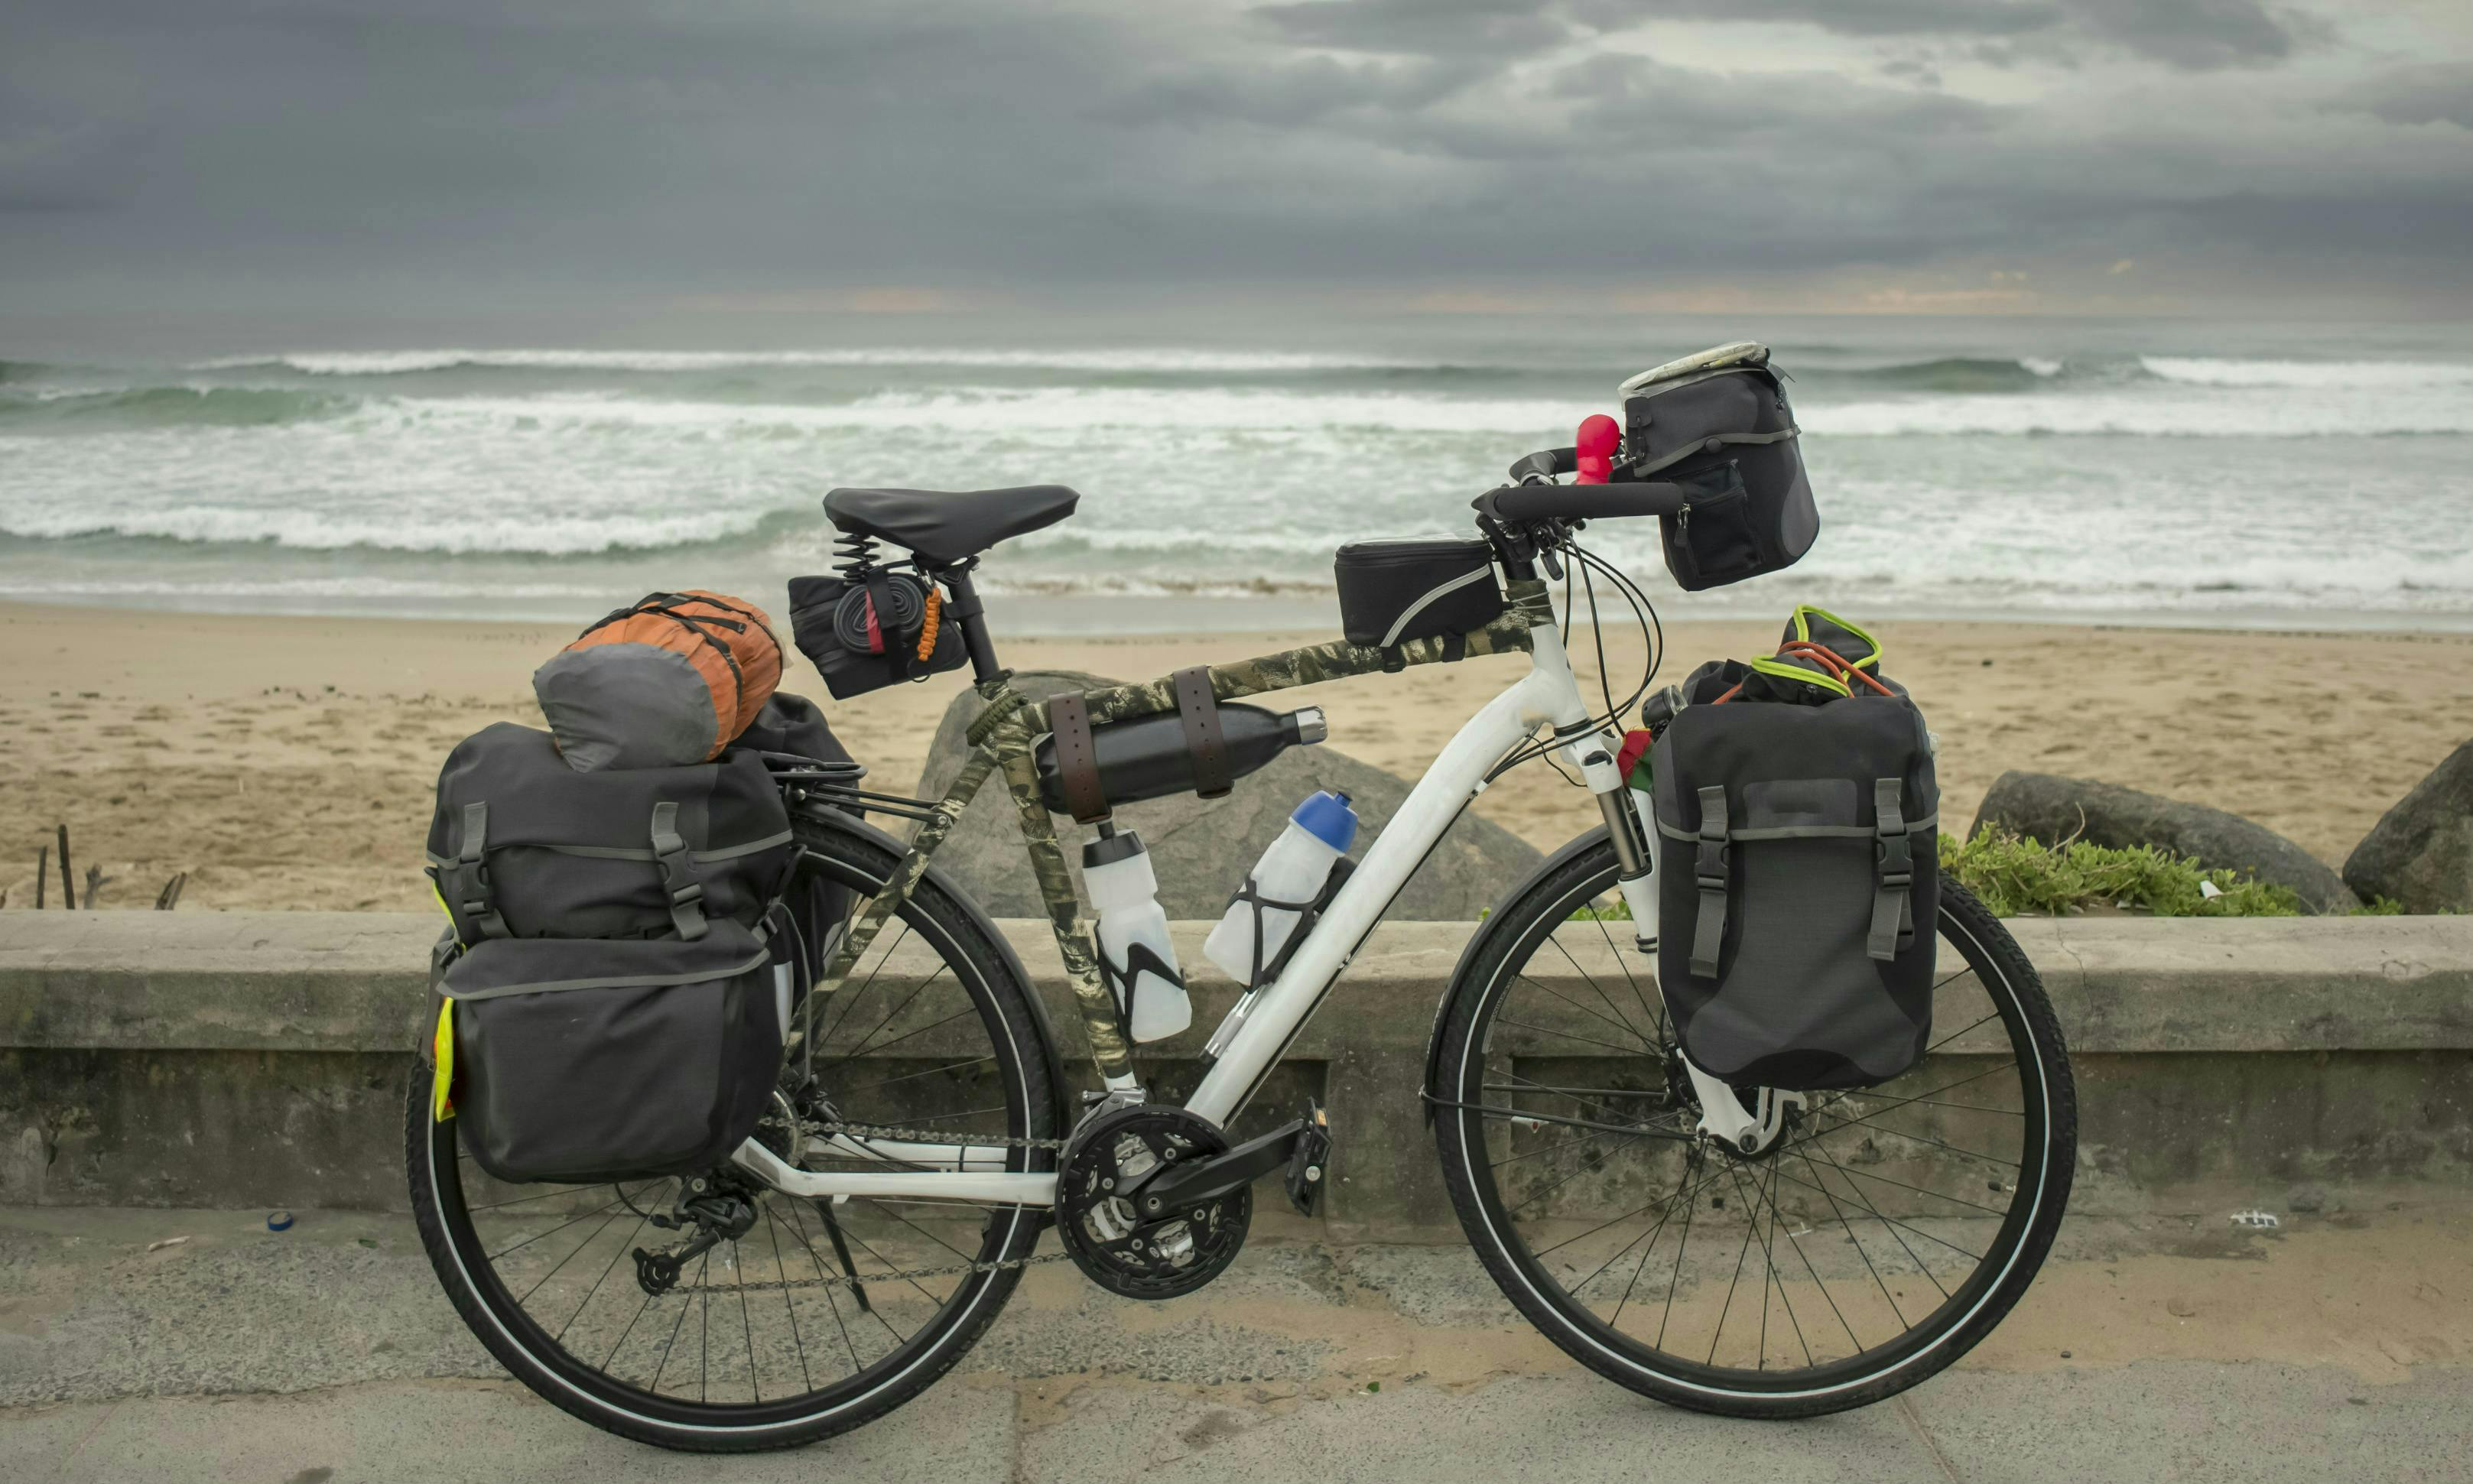 Fully kitted out for bike touring, with front and back panniers, a handlebar frame bag and a small seat bag.